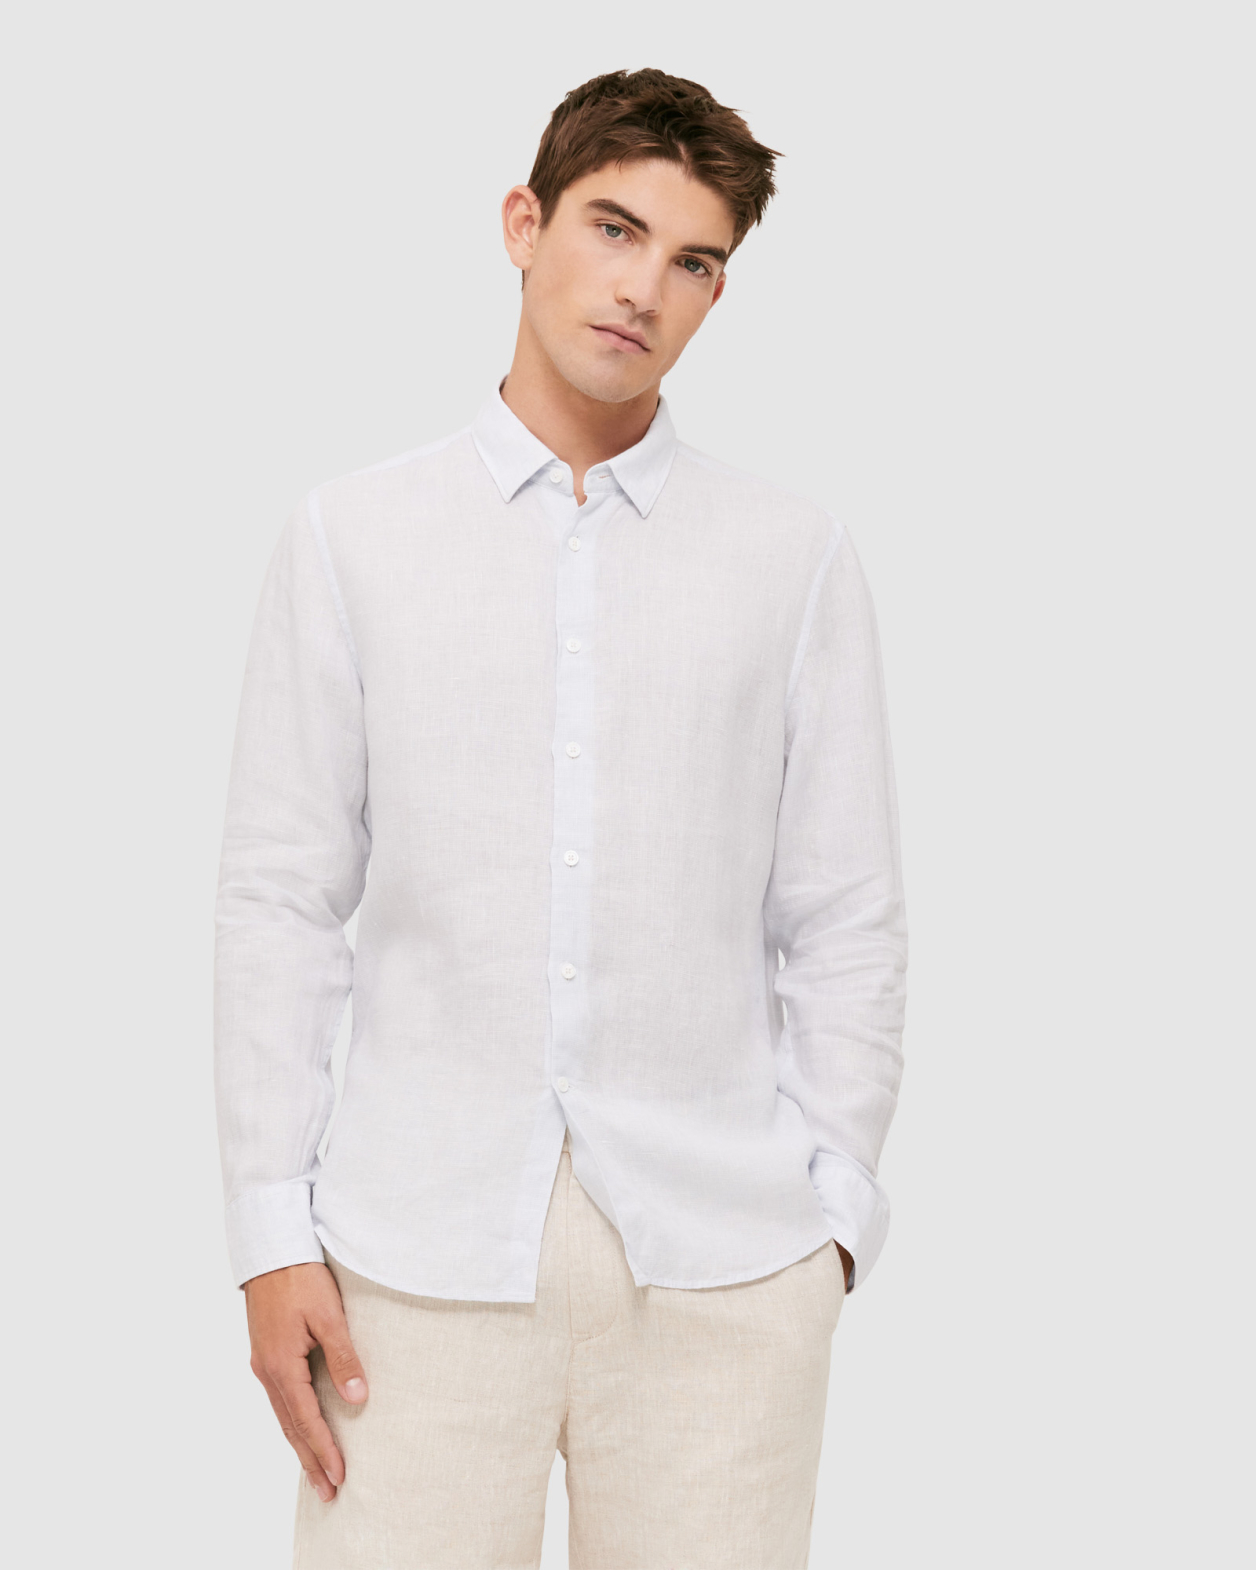 Anderson Long Sleeve Classic Linen Shirt in STORM BLUE